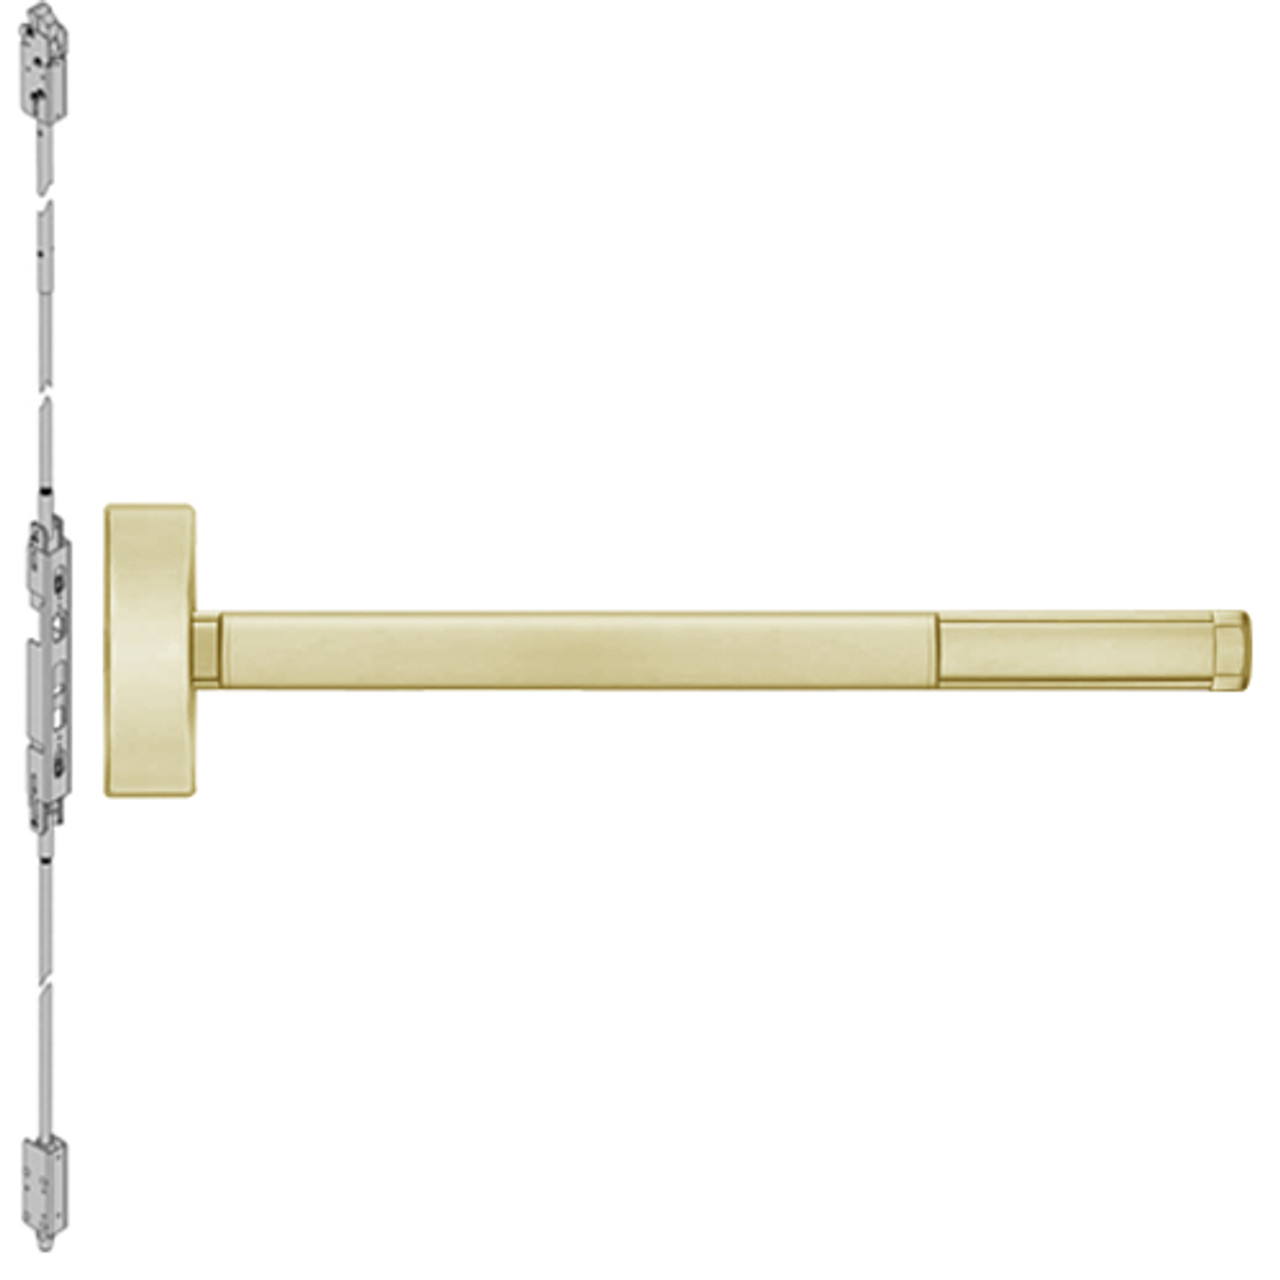 DE2803-606-36 PHI 2800 Series Concealed Vertical Rod Exit Device with Delayed Egress Prepped for Key Retracts Latchbolt in Satin Brass Finish